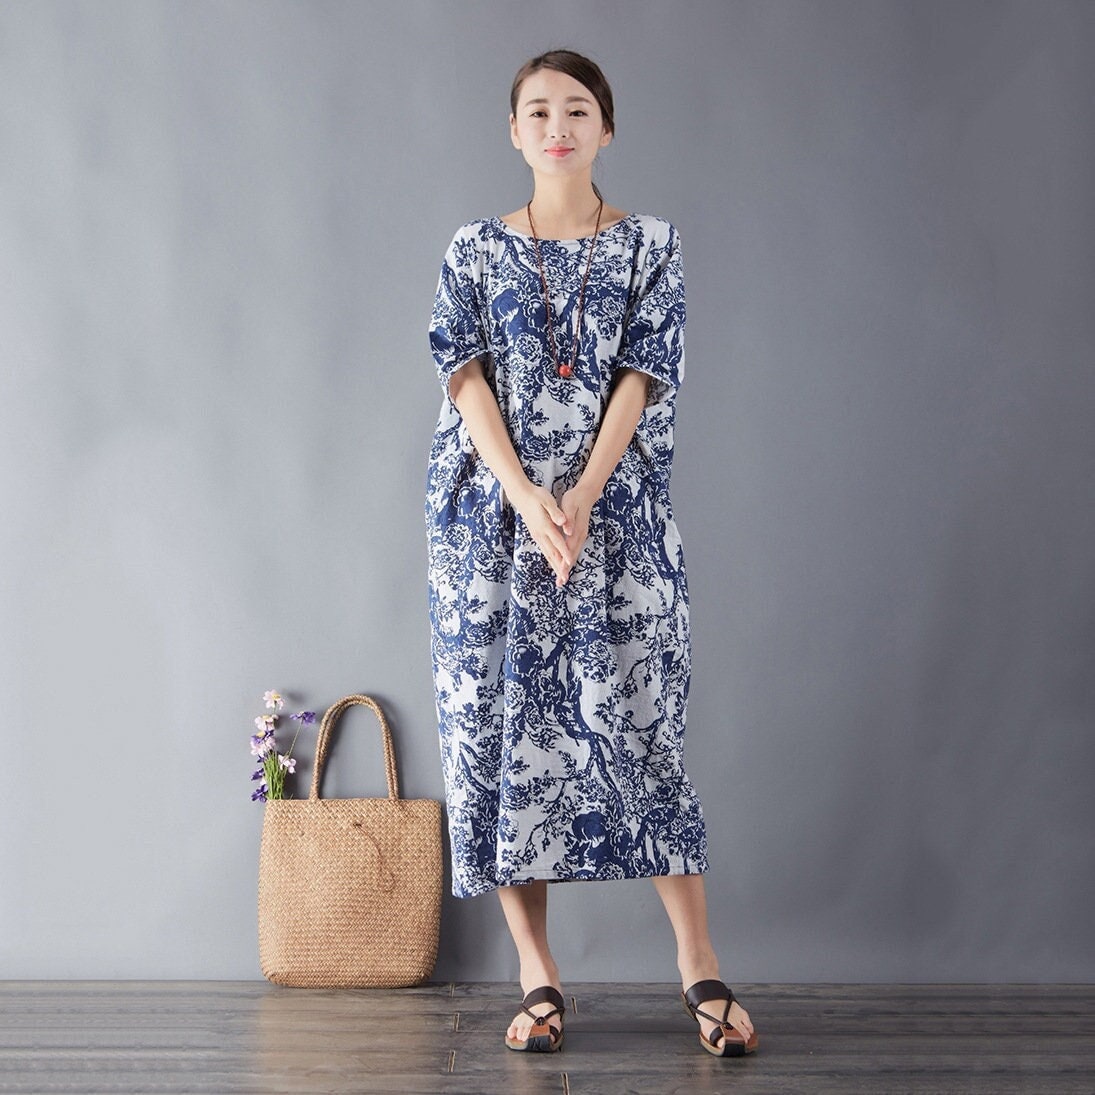 Women Printed Cotton Dress Floral Casual Loose Robes Half Sleeves Shift Dress Boho Midi Dresses Customized Dress Plus Size Clothing Linen